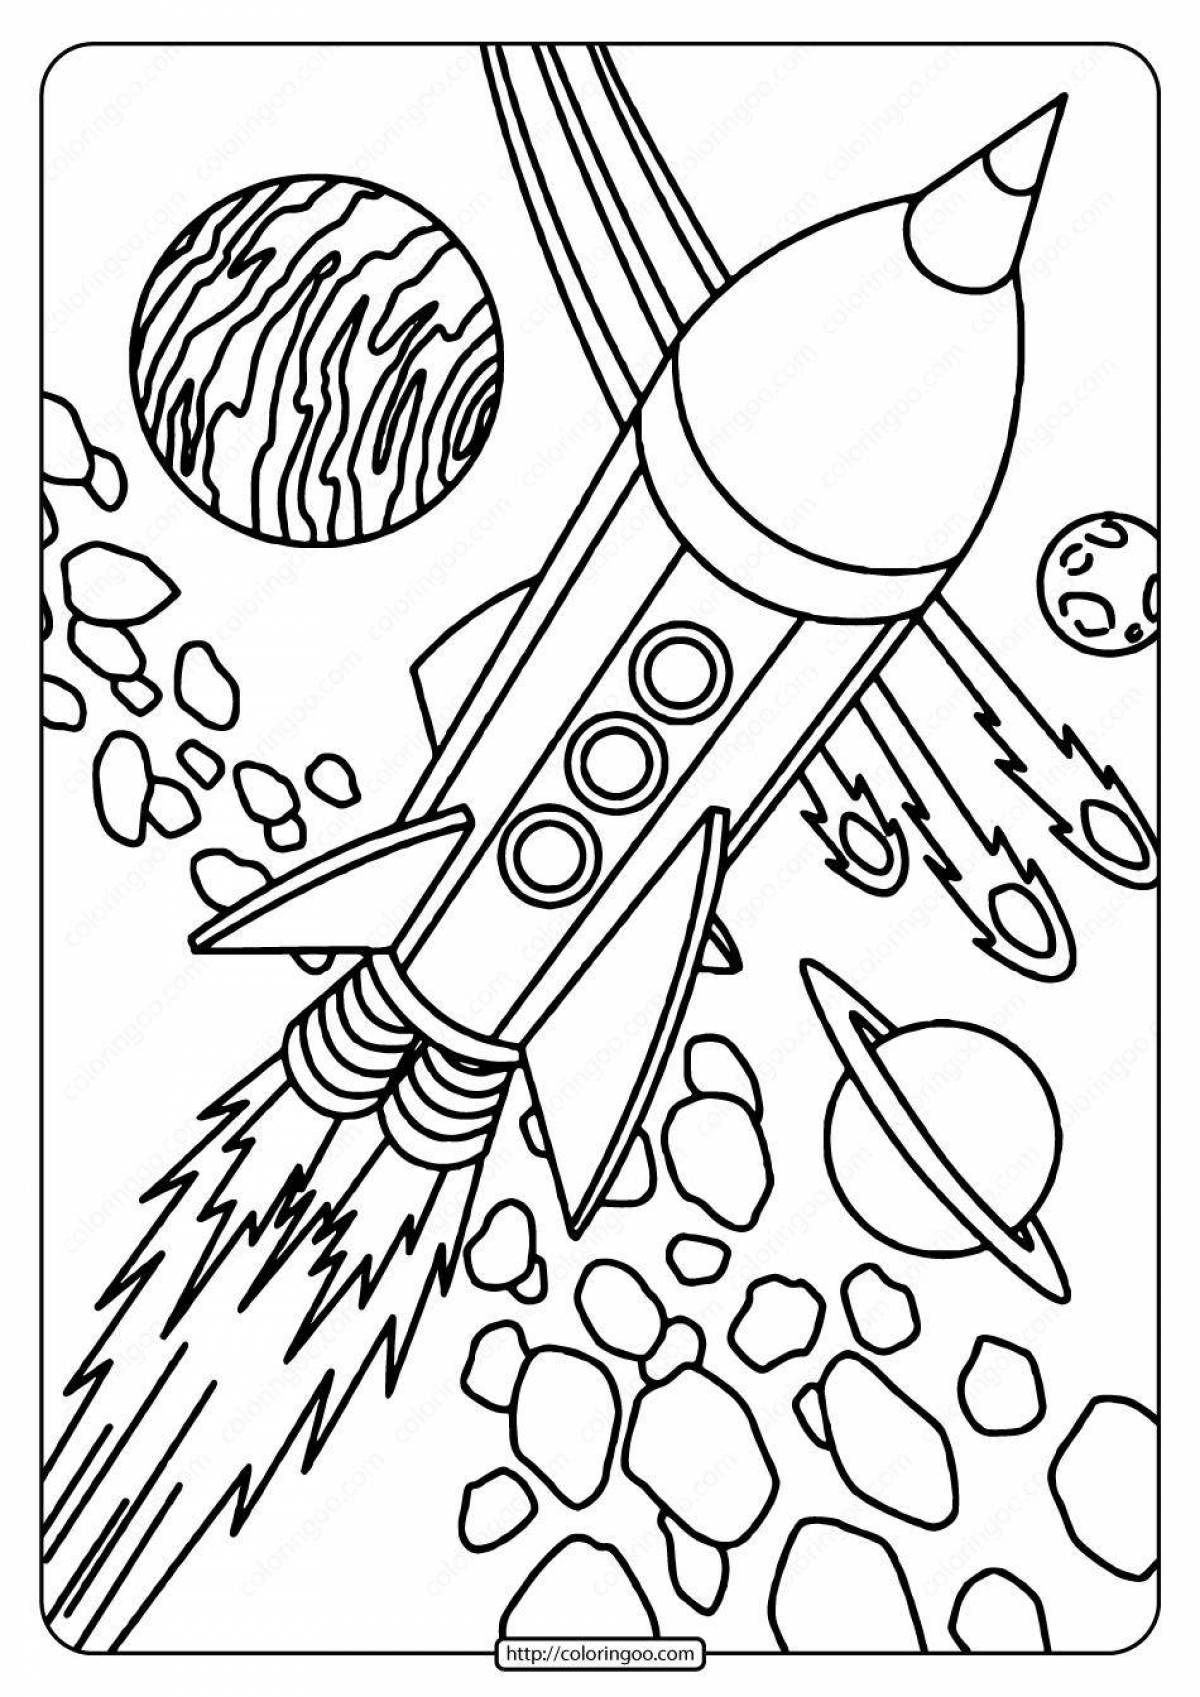 Grand Rocket Coloring Page